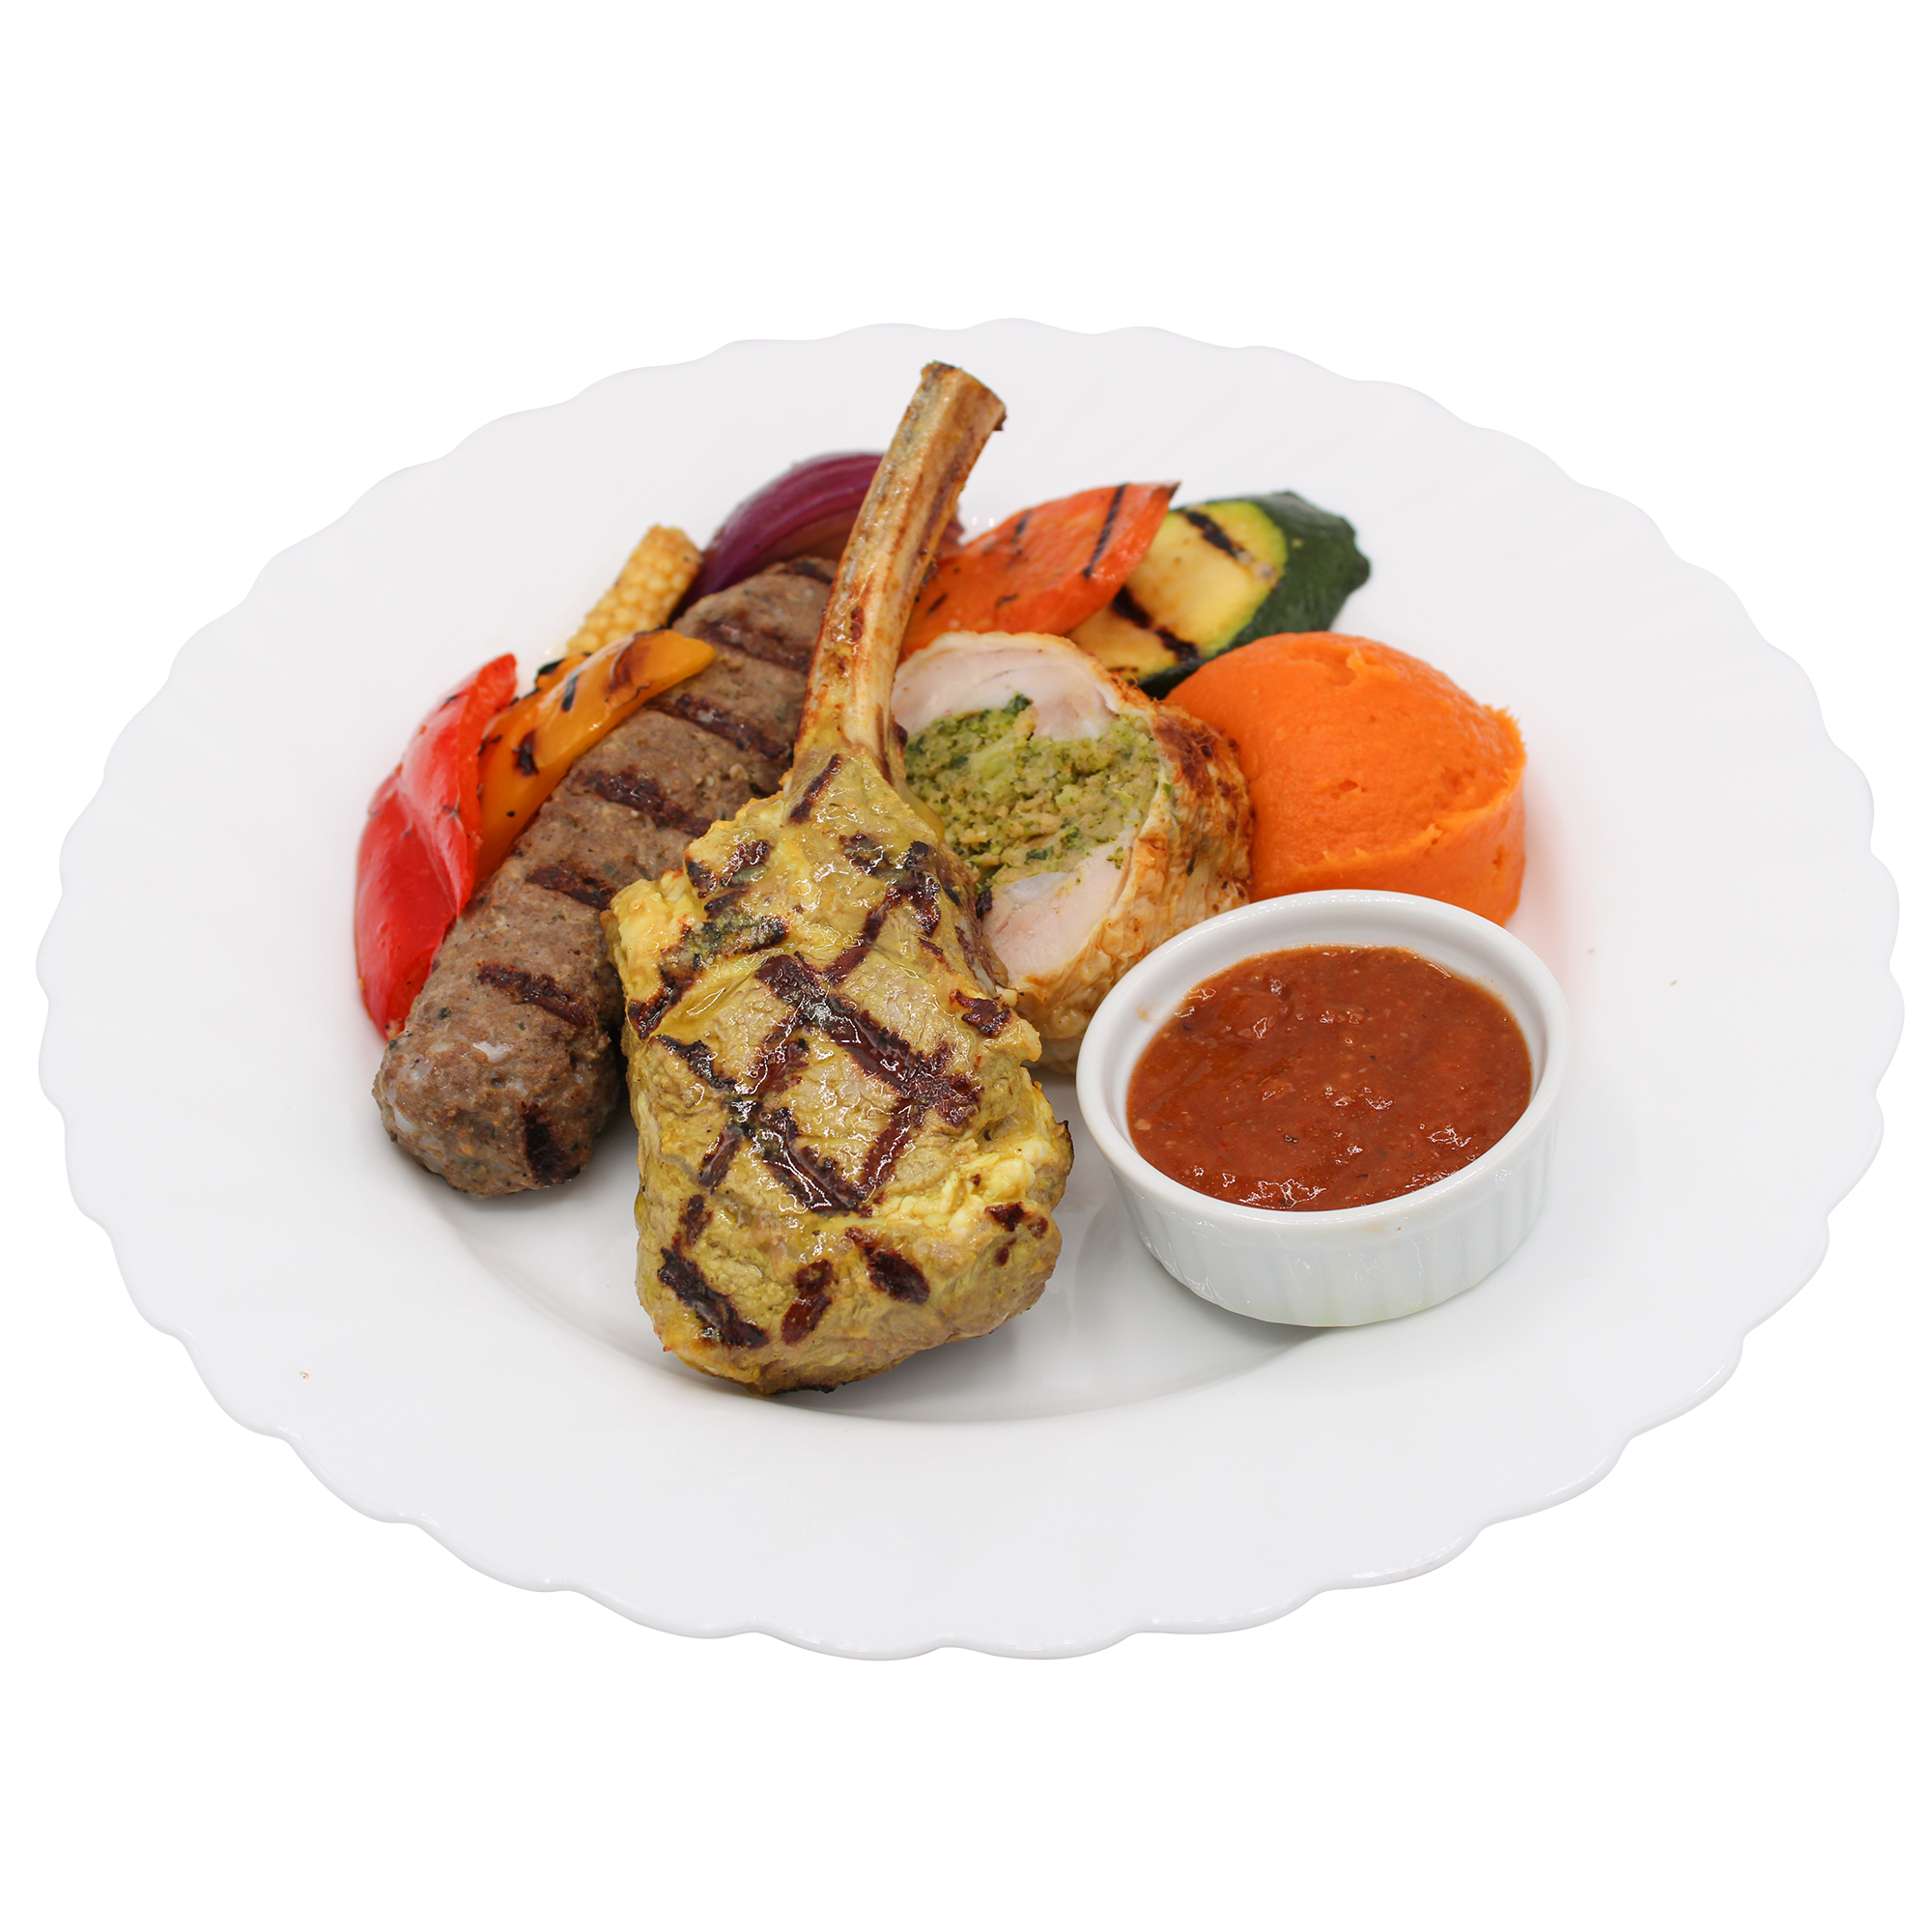 Stuffed Chicken Leg With Broccoli, Lamb Kofta, Bbq Grilled Lamb Chops Served With Smoked Sweet Potato & Grilled Mediterranean Vegetables With Rosemary & Shallot Sauce Disposable